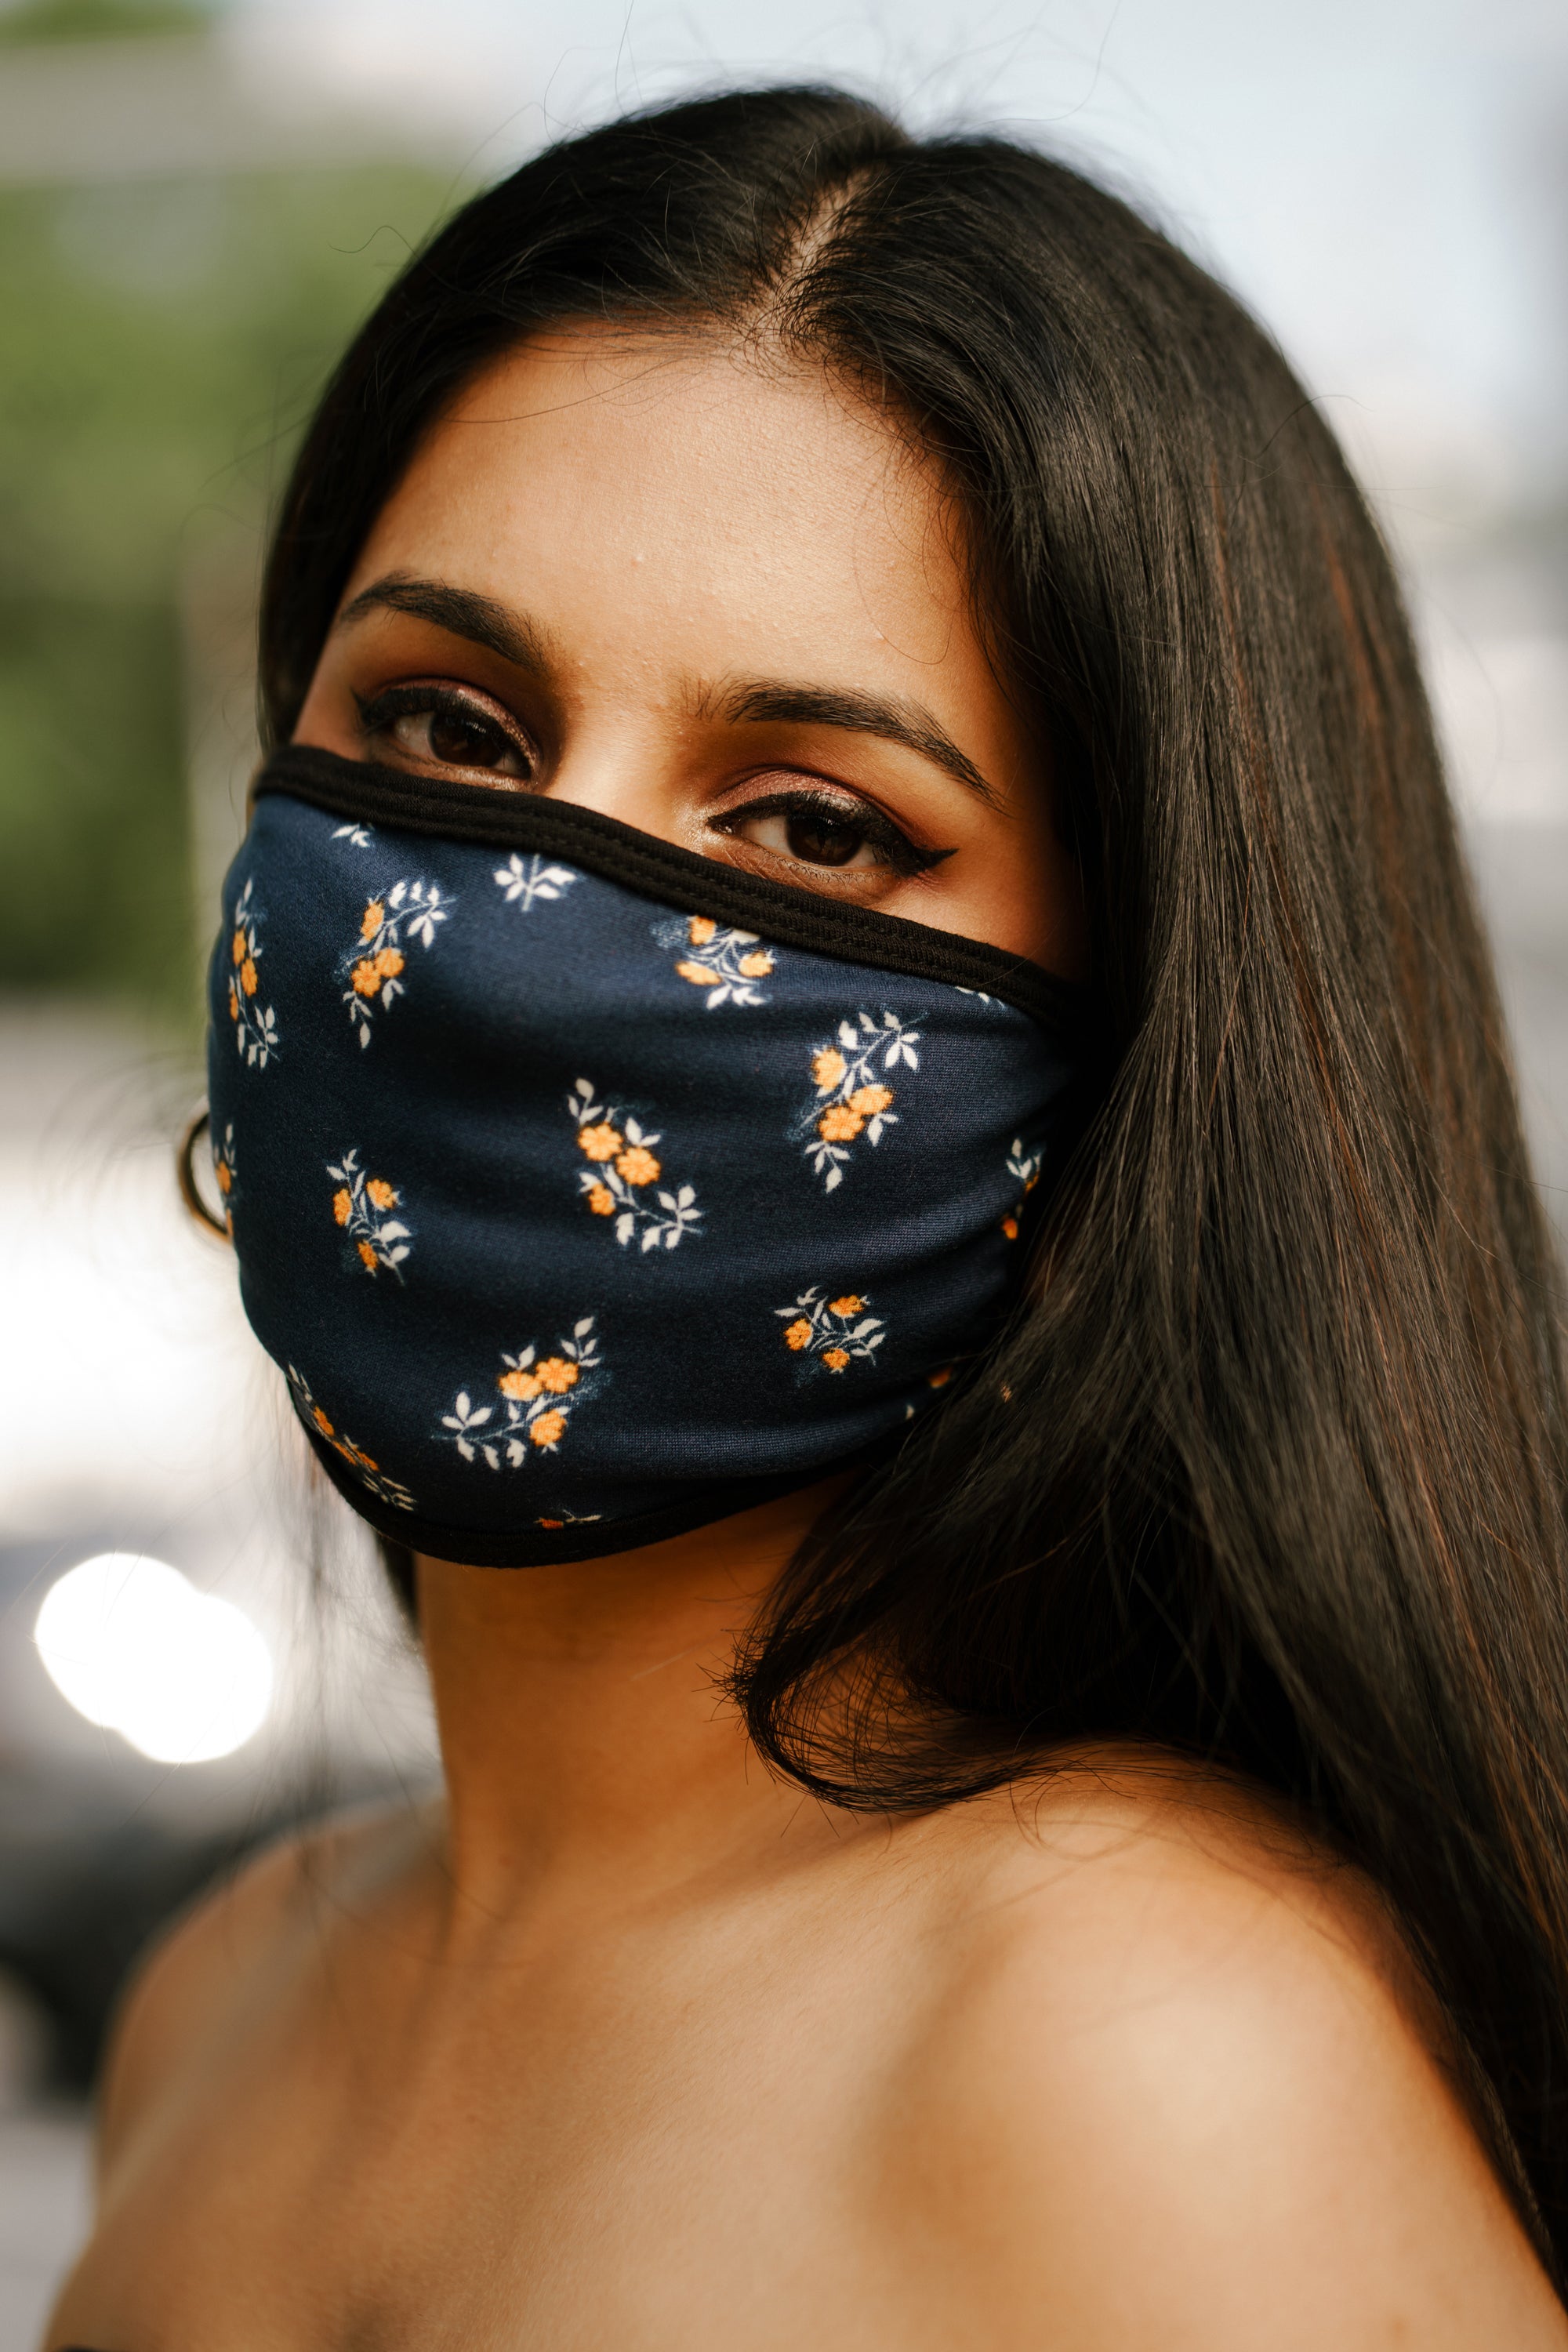 The Top Makeup & Mask Trends — According To Street Style